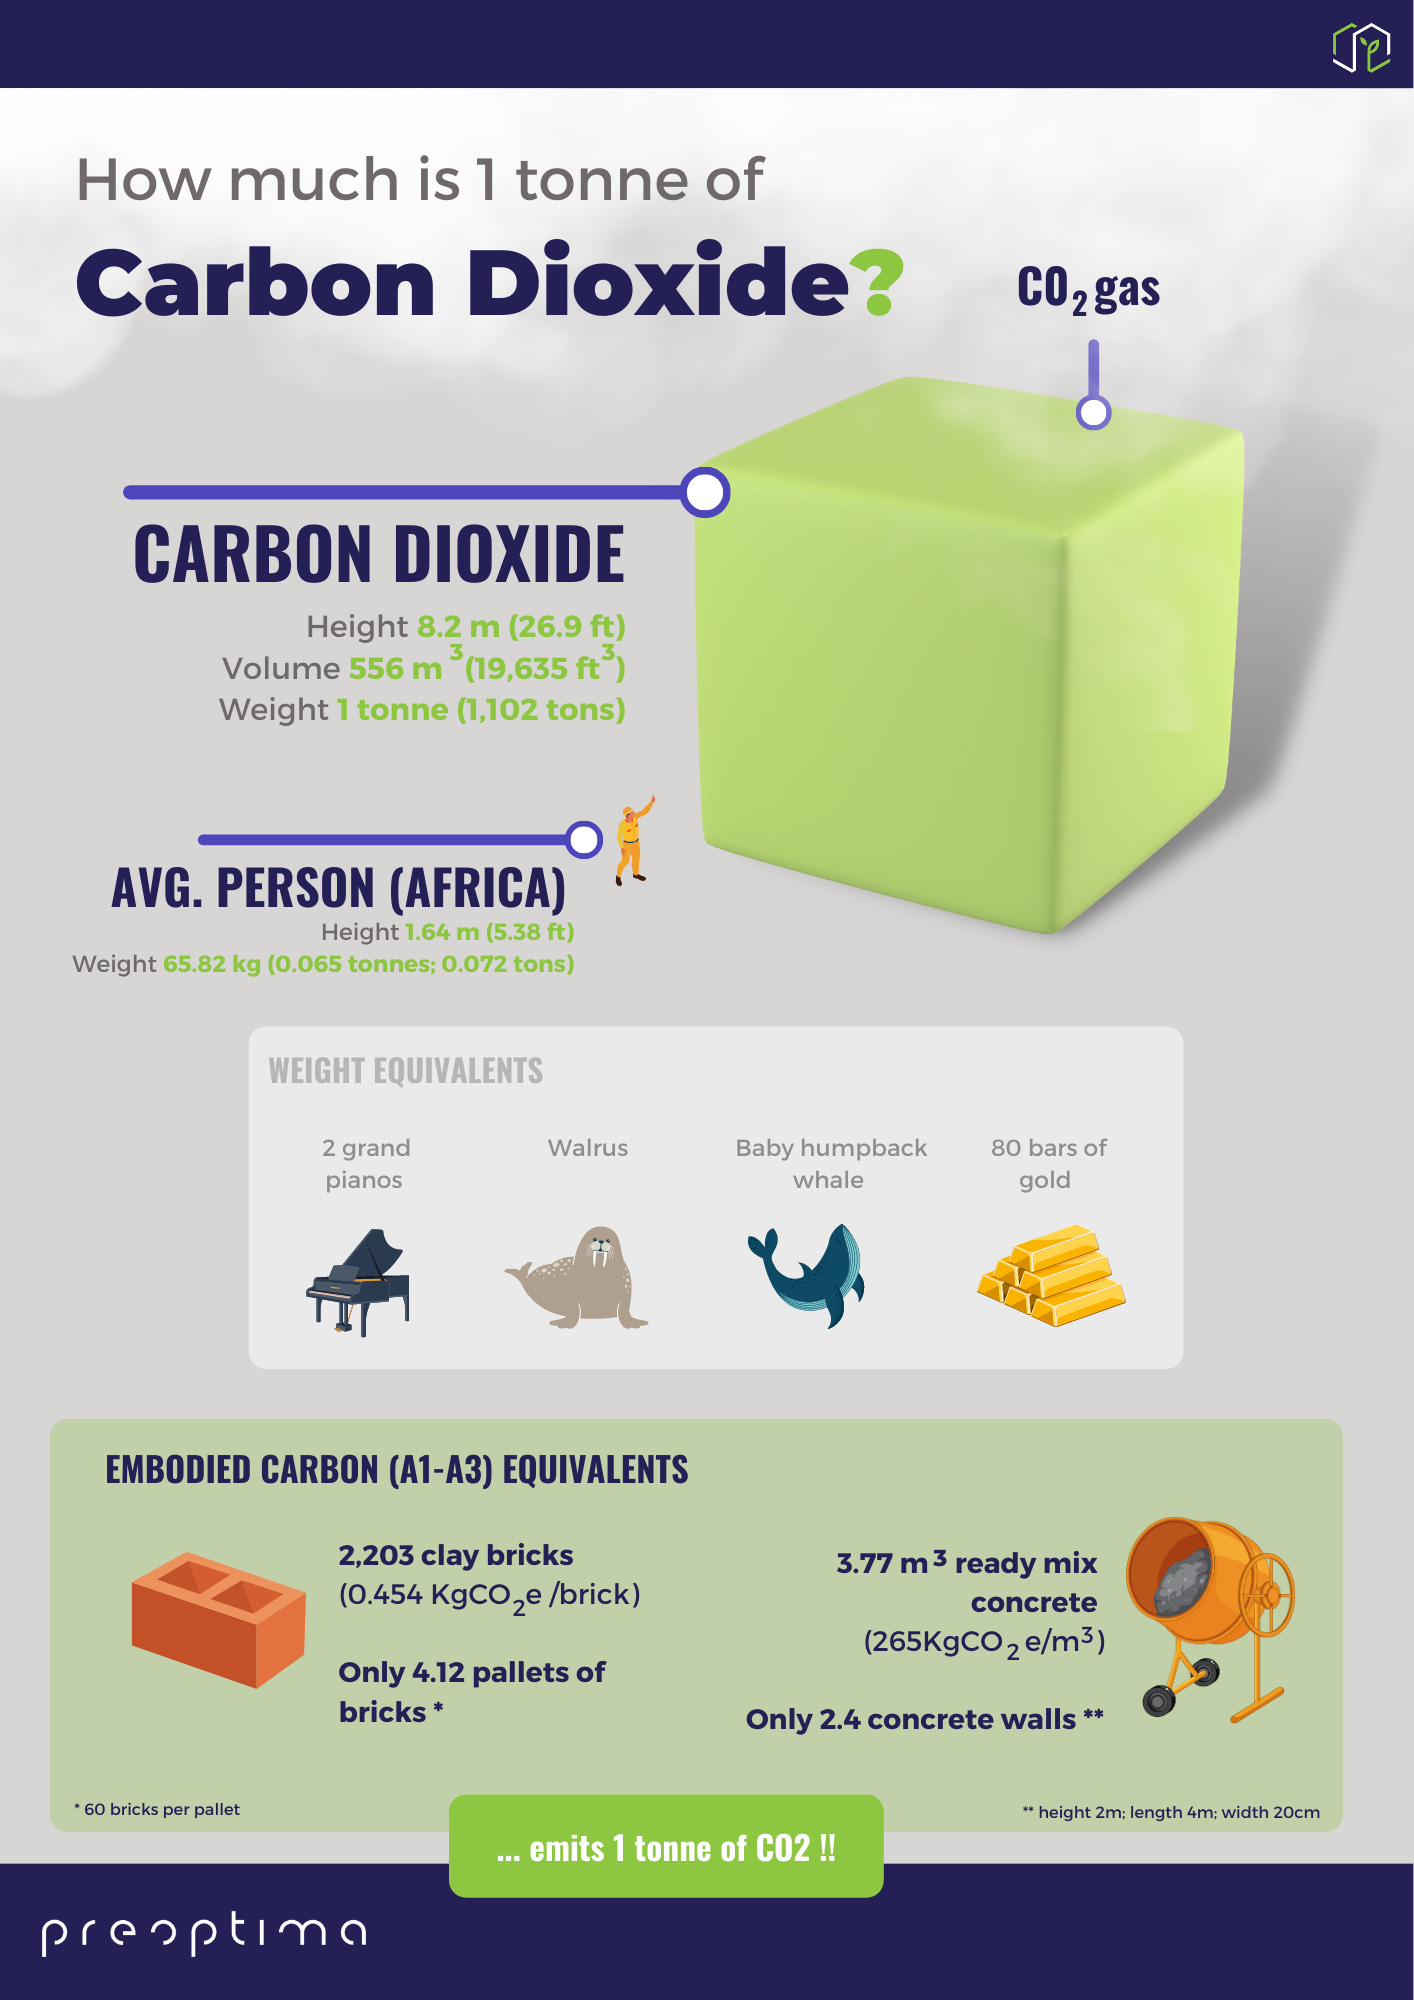 How much does a tonne of carbon dioxide weigh?